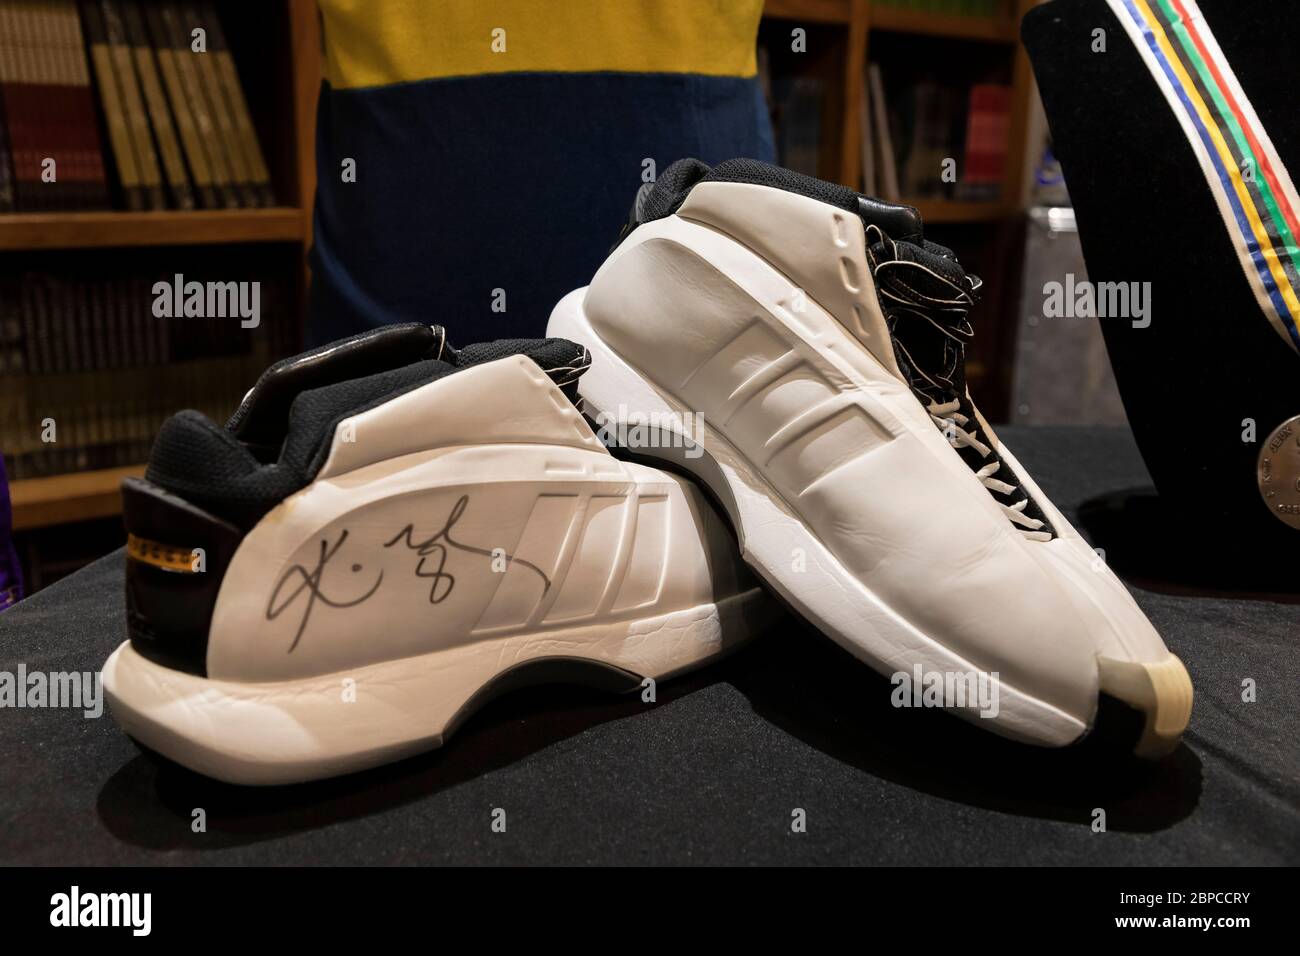 Culver City, USA. 18th May, 2020. Sports Legends featuring Lakers  basketball great Kobe Bryant at JulienÕs Auctions. Game worn Adidas  basketball shoes each signed by Kobe Bryant #8. 5/18/2020 Culver City, CA